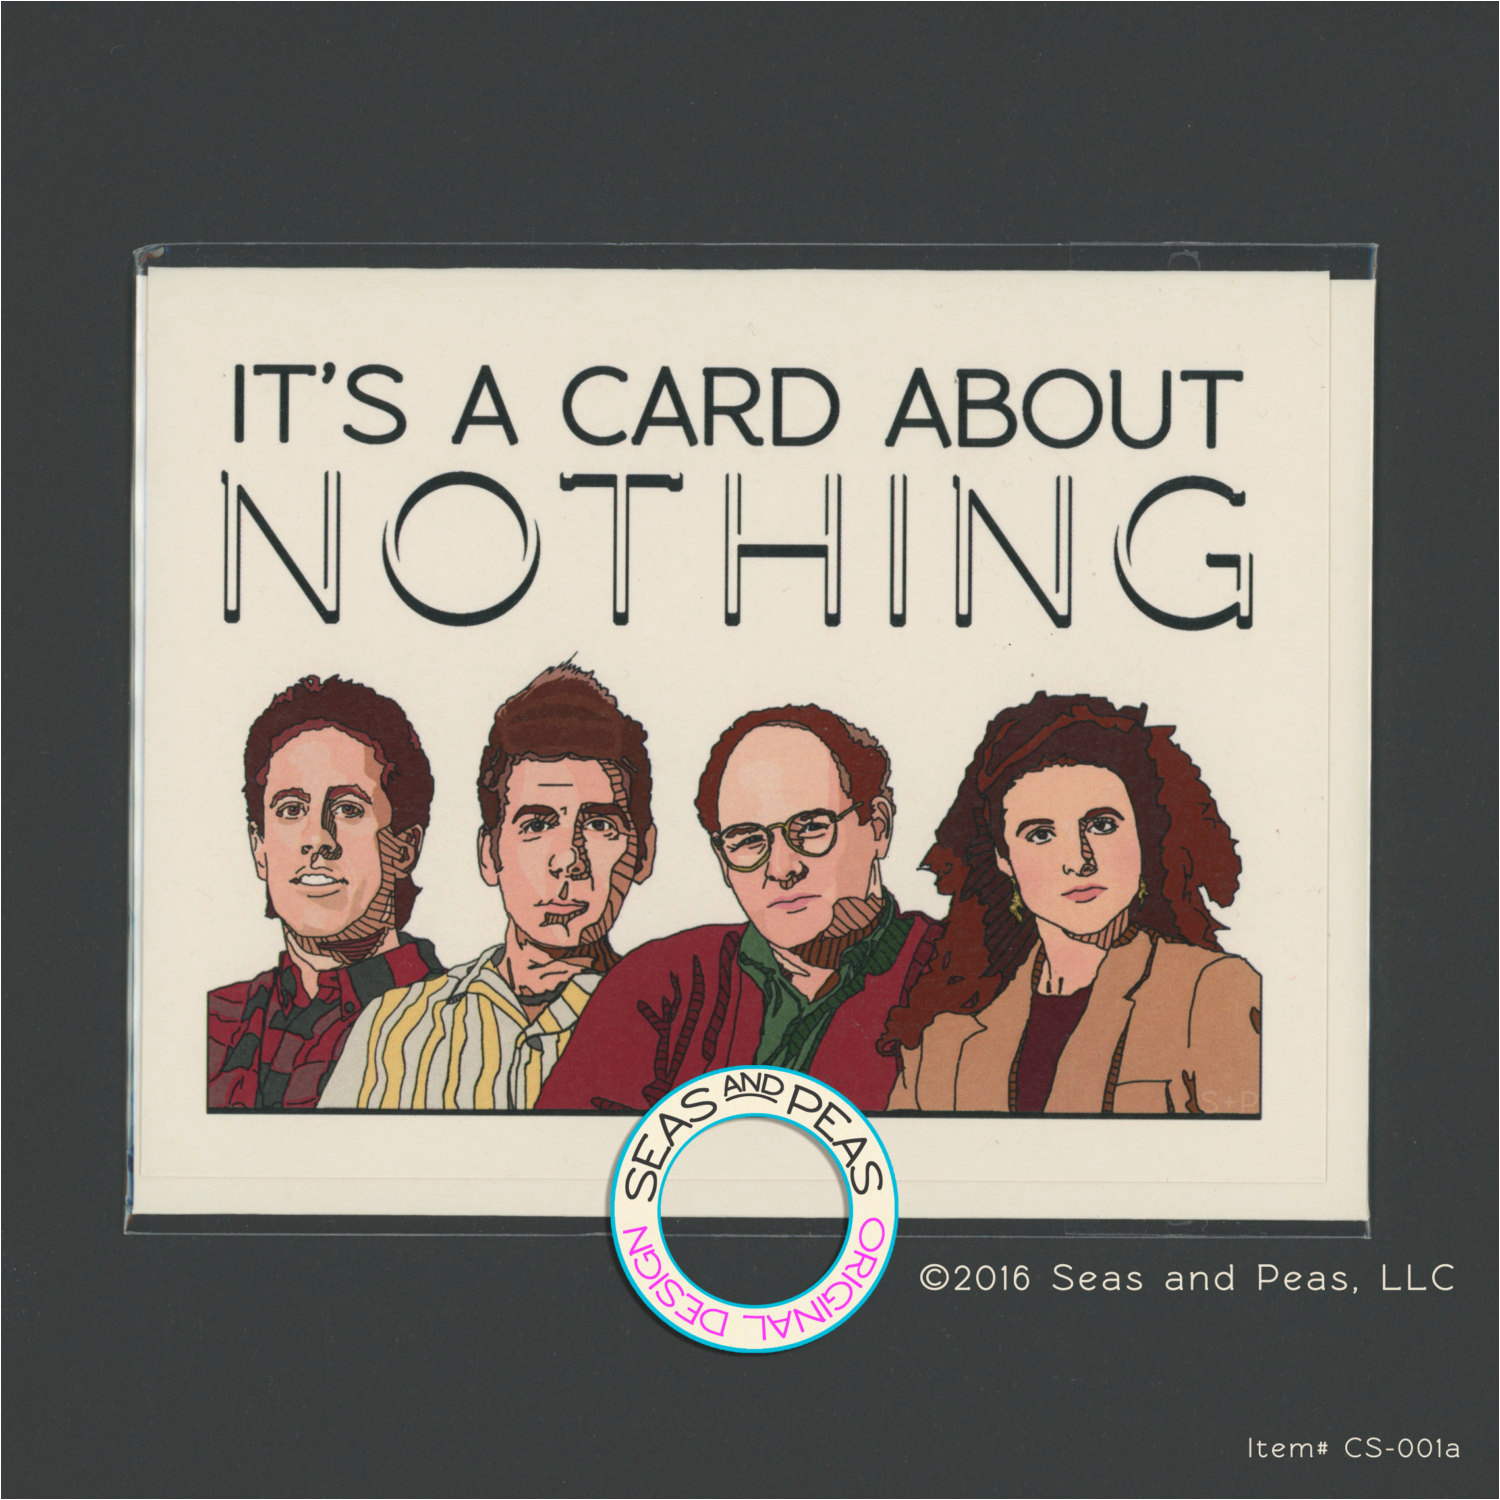 seinfeld-birthday-card-a-card-about-nothing-seinfeld-card-seinfeld-card